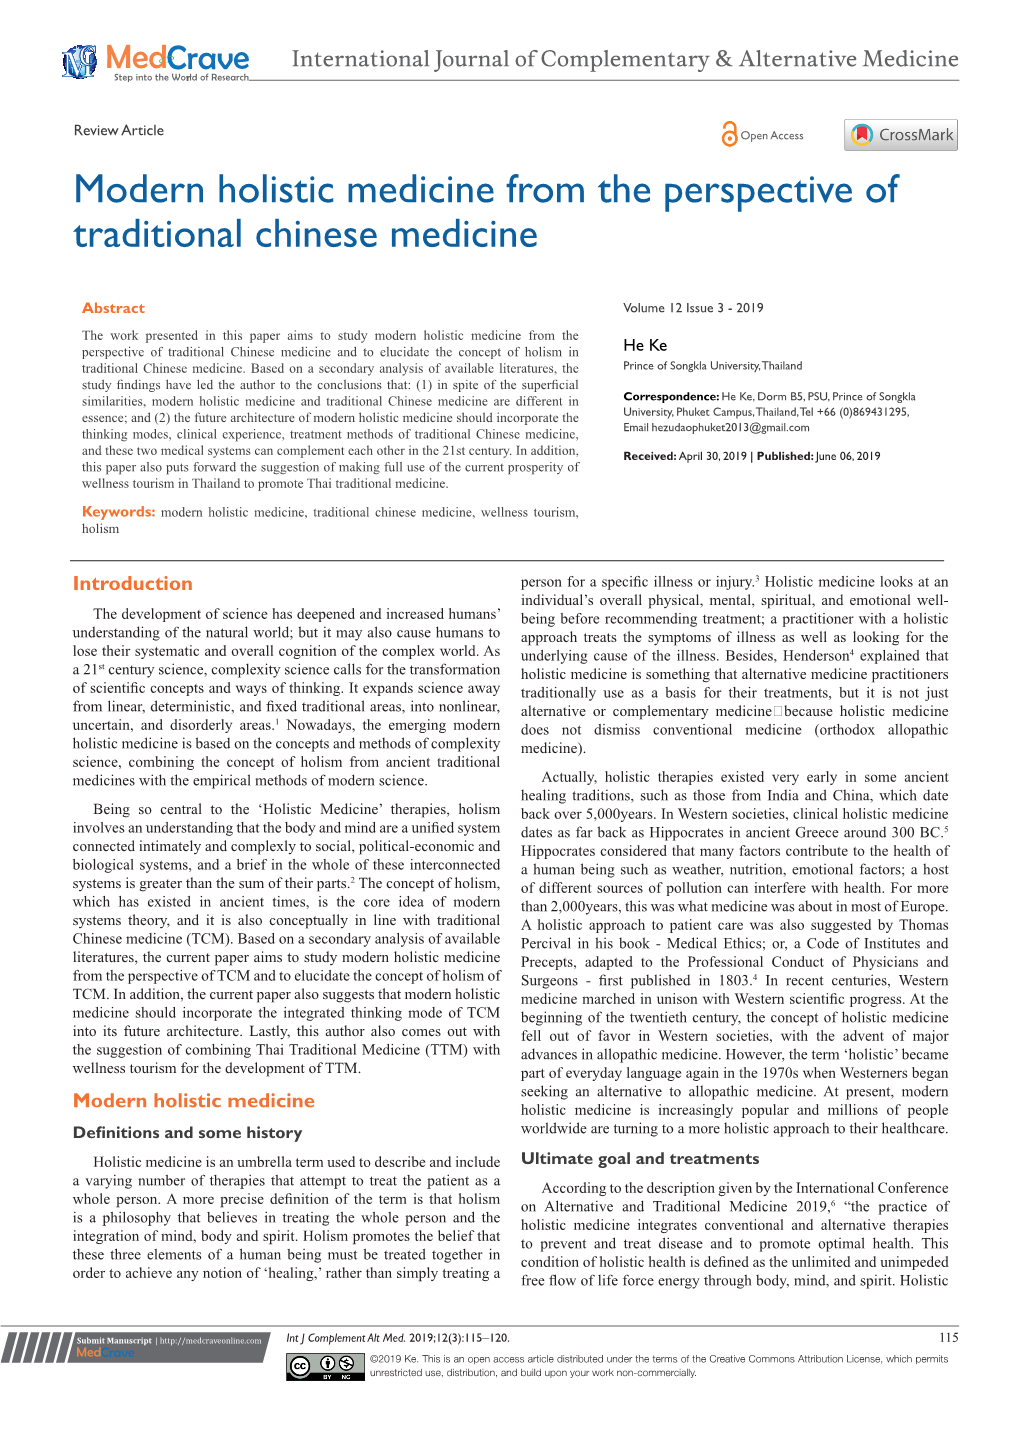 Modern Holistic Medicine from the Perspective of Traditional Chinese Medicine